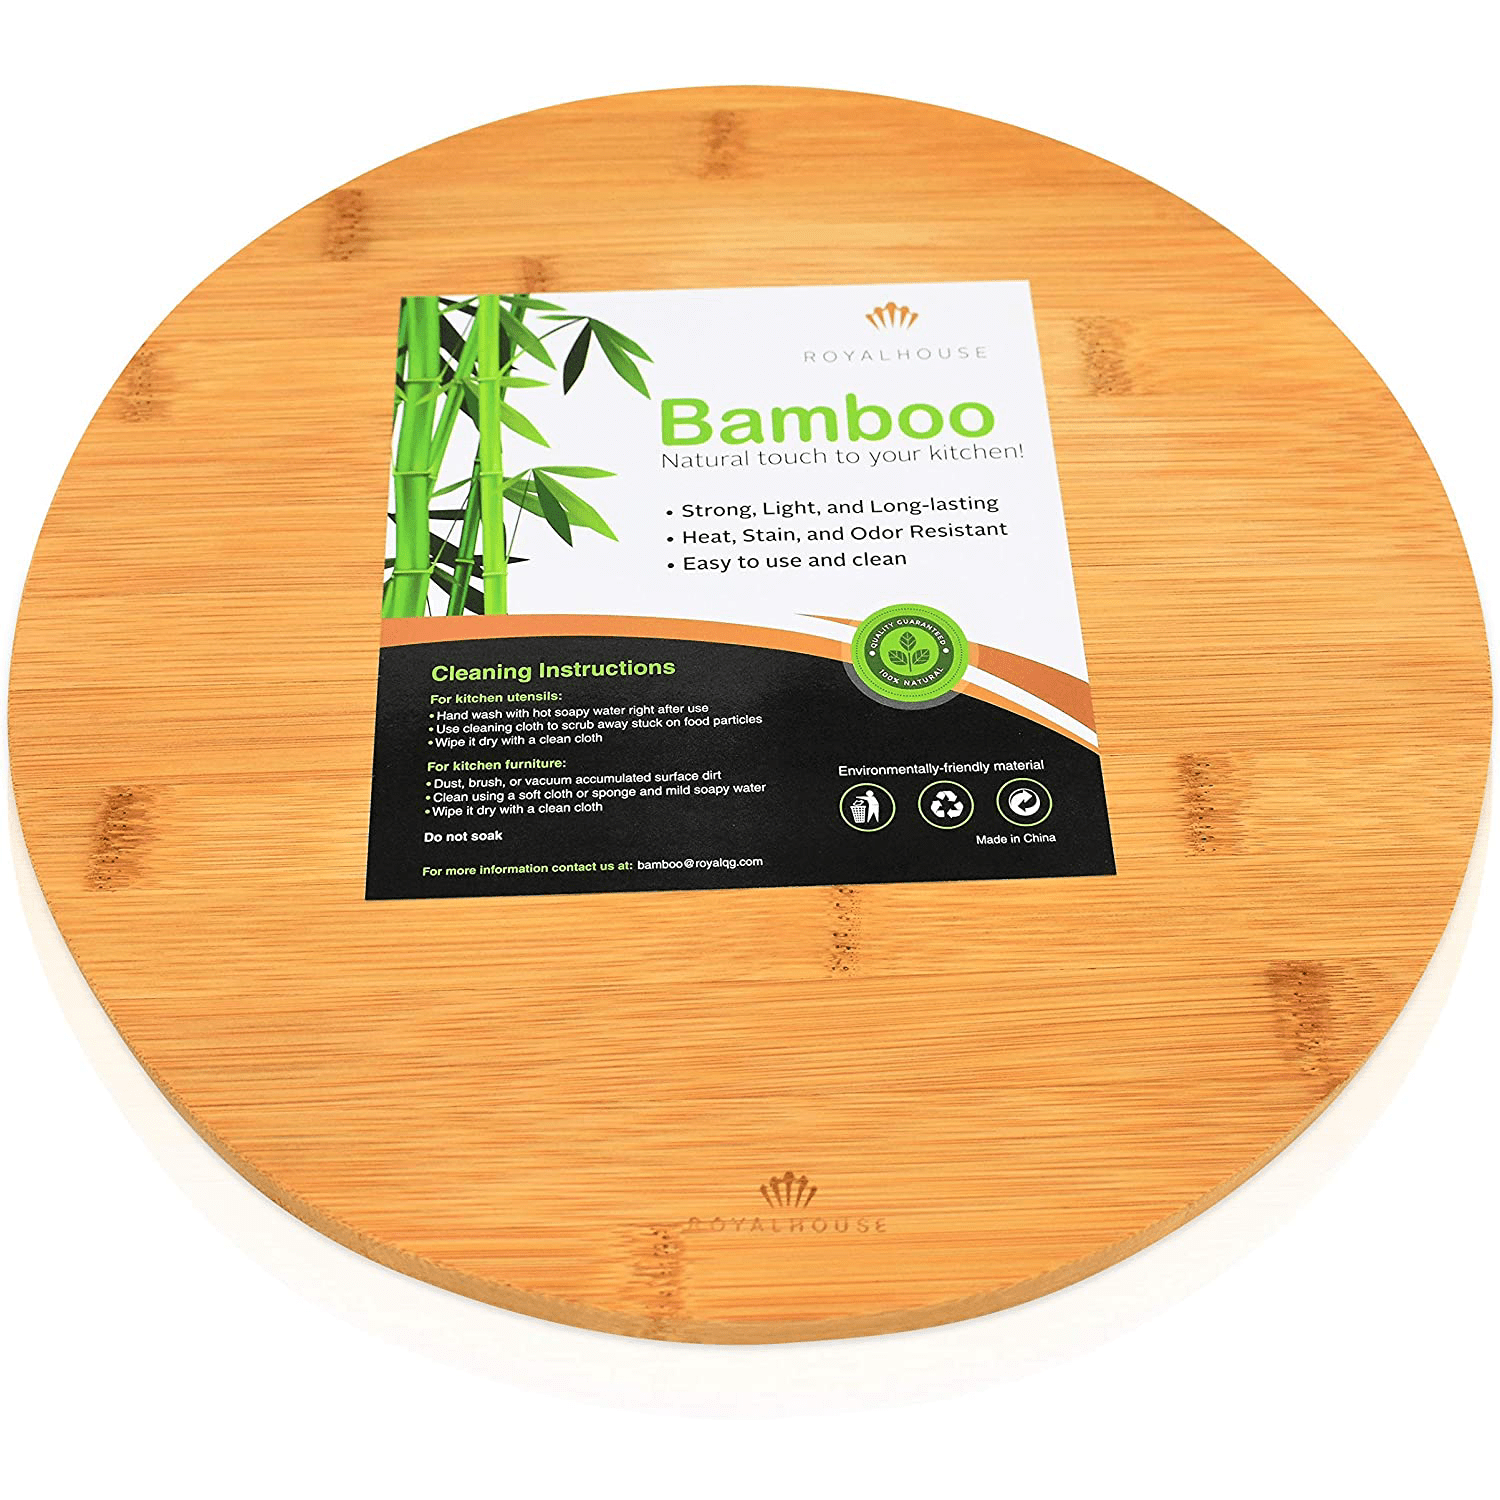 https://www.momjunction.com/wp-content/uploads/product-images/round-bamboo-cutting-board-for-kitchen-by-royal-house_afl363.png